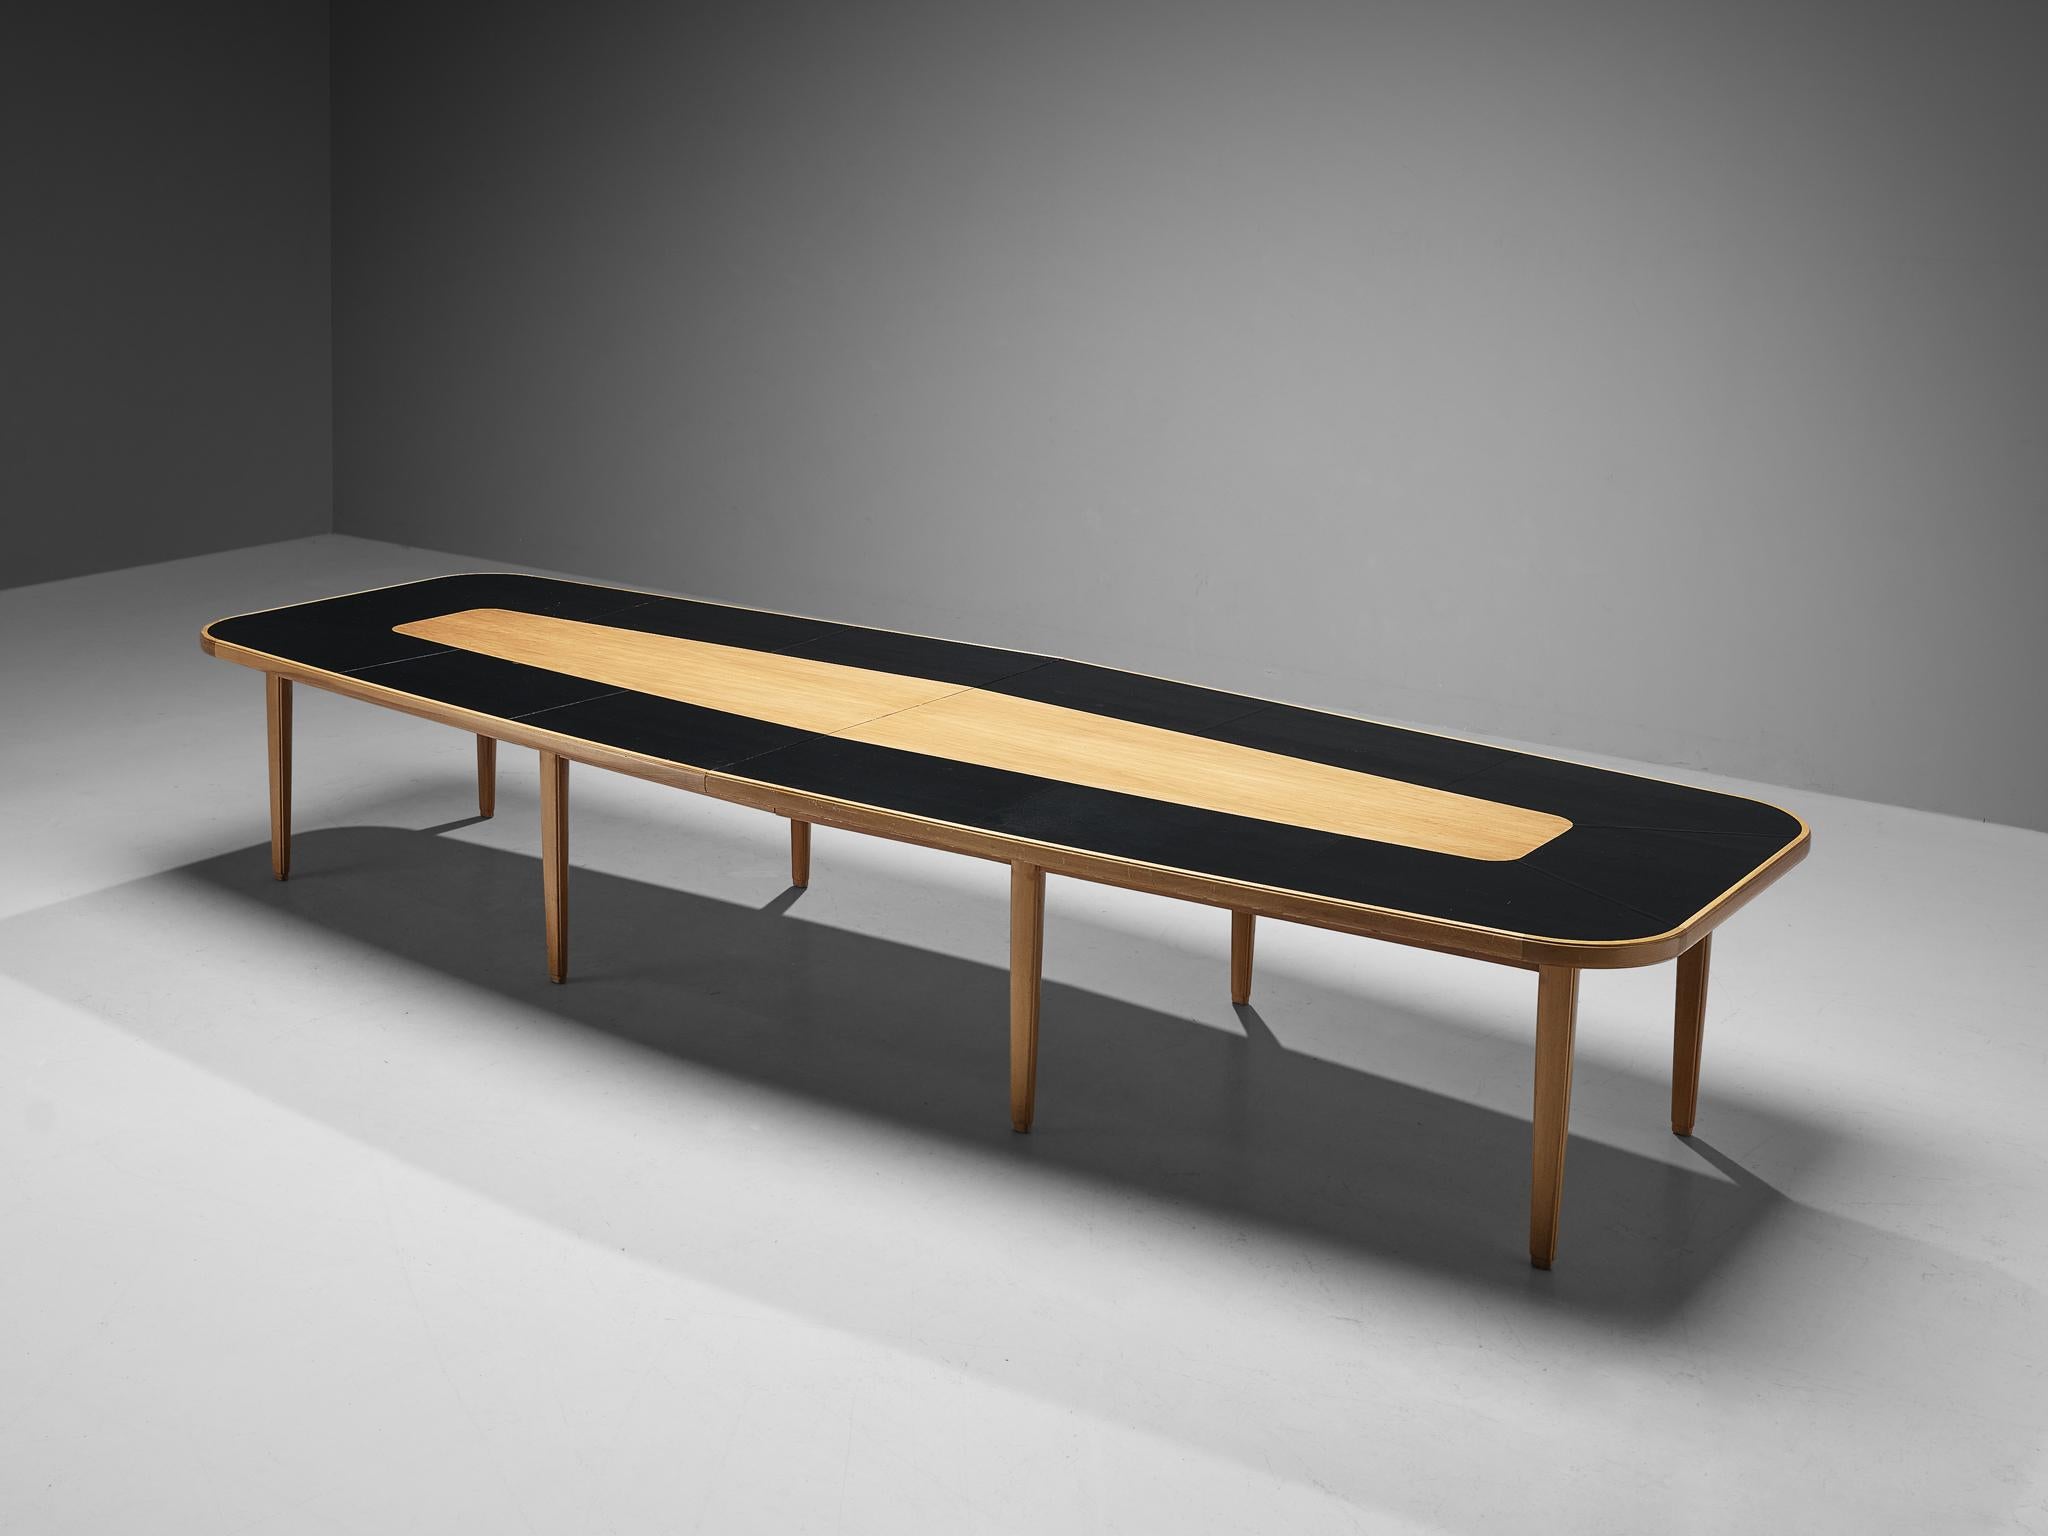 Carl Malmsten, dining or conference table, walnut, leather, Sweden, 1940s. 

Sizeable dining table that, due to its length, could easily function as a conference table as well. This table is designed by Swedish designer Carl Malmsten. The boat